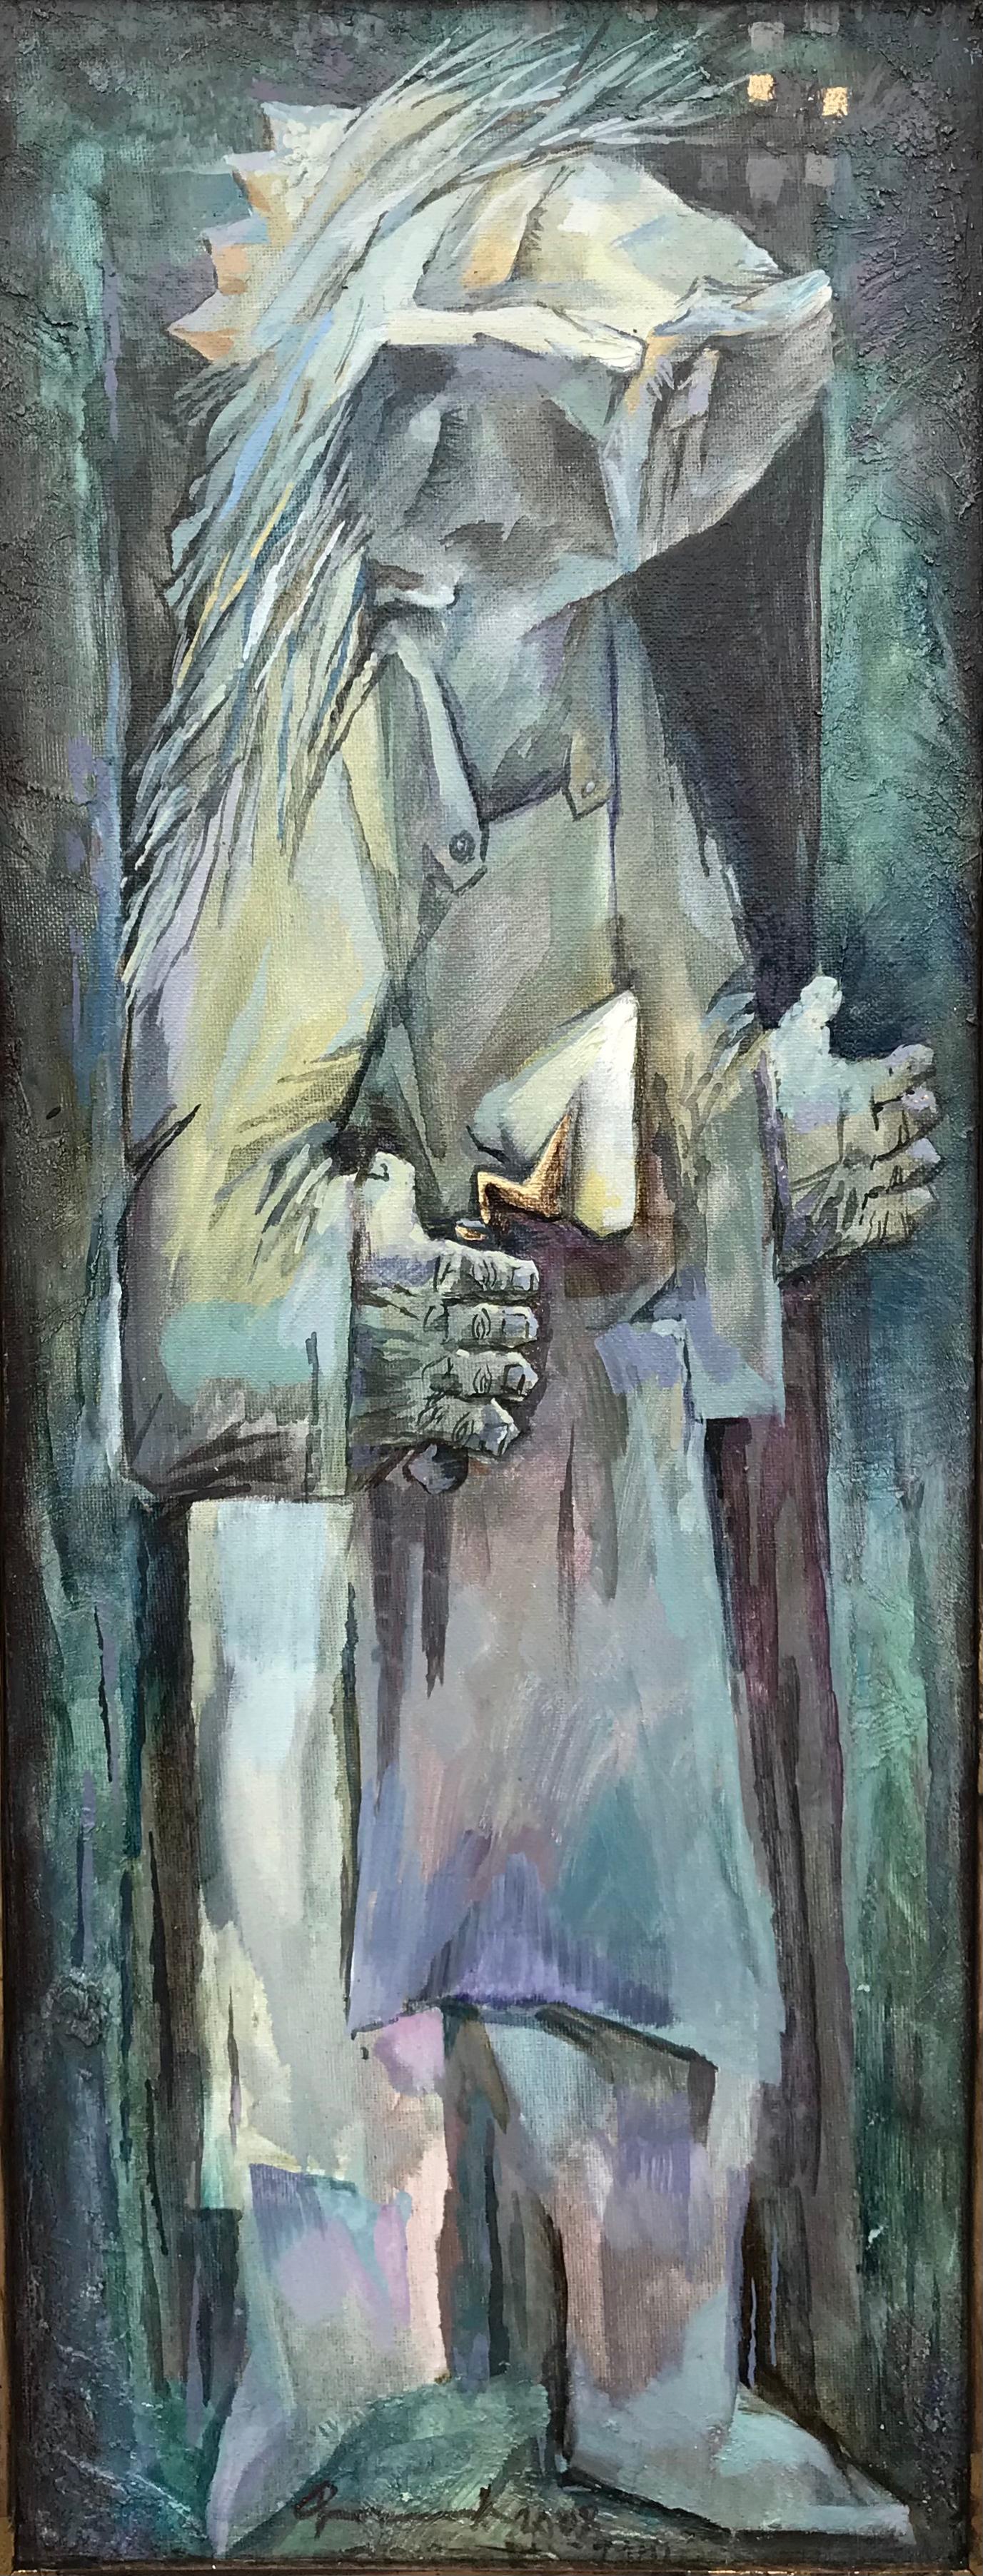 The King is The Builder - Painting by  Igor Filippov